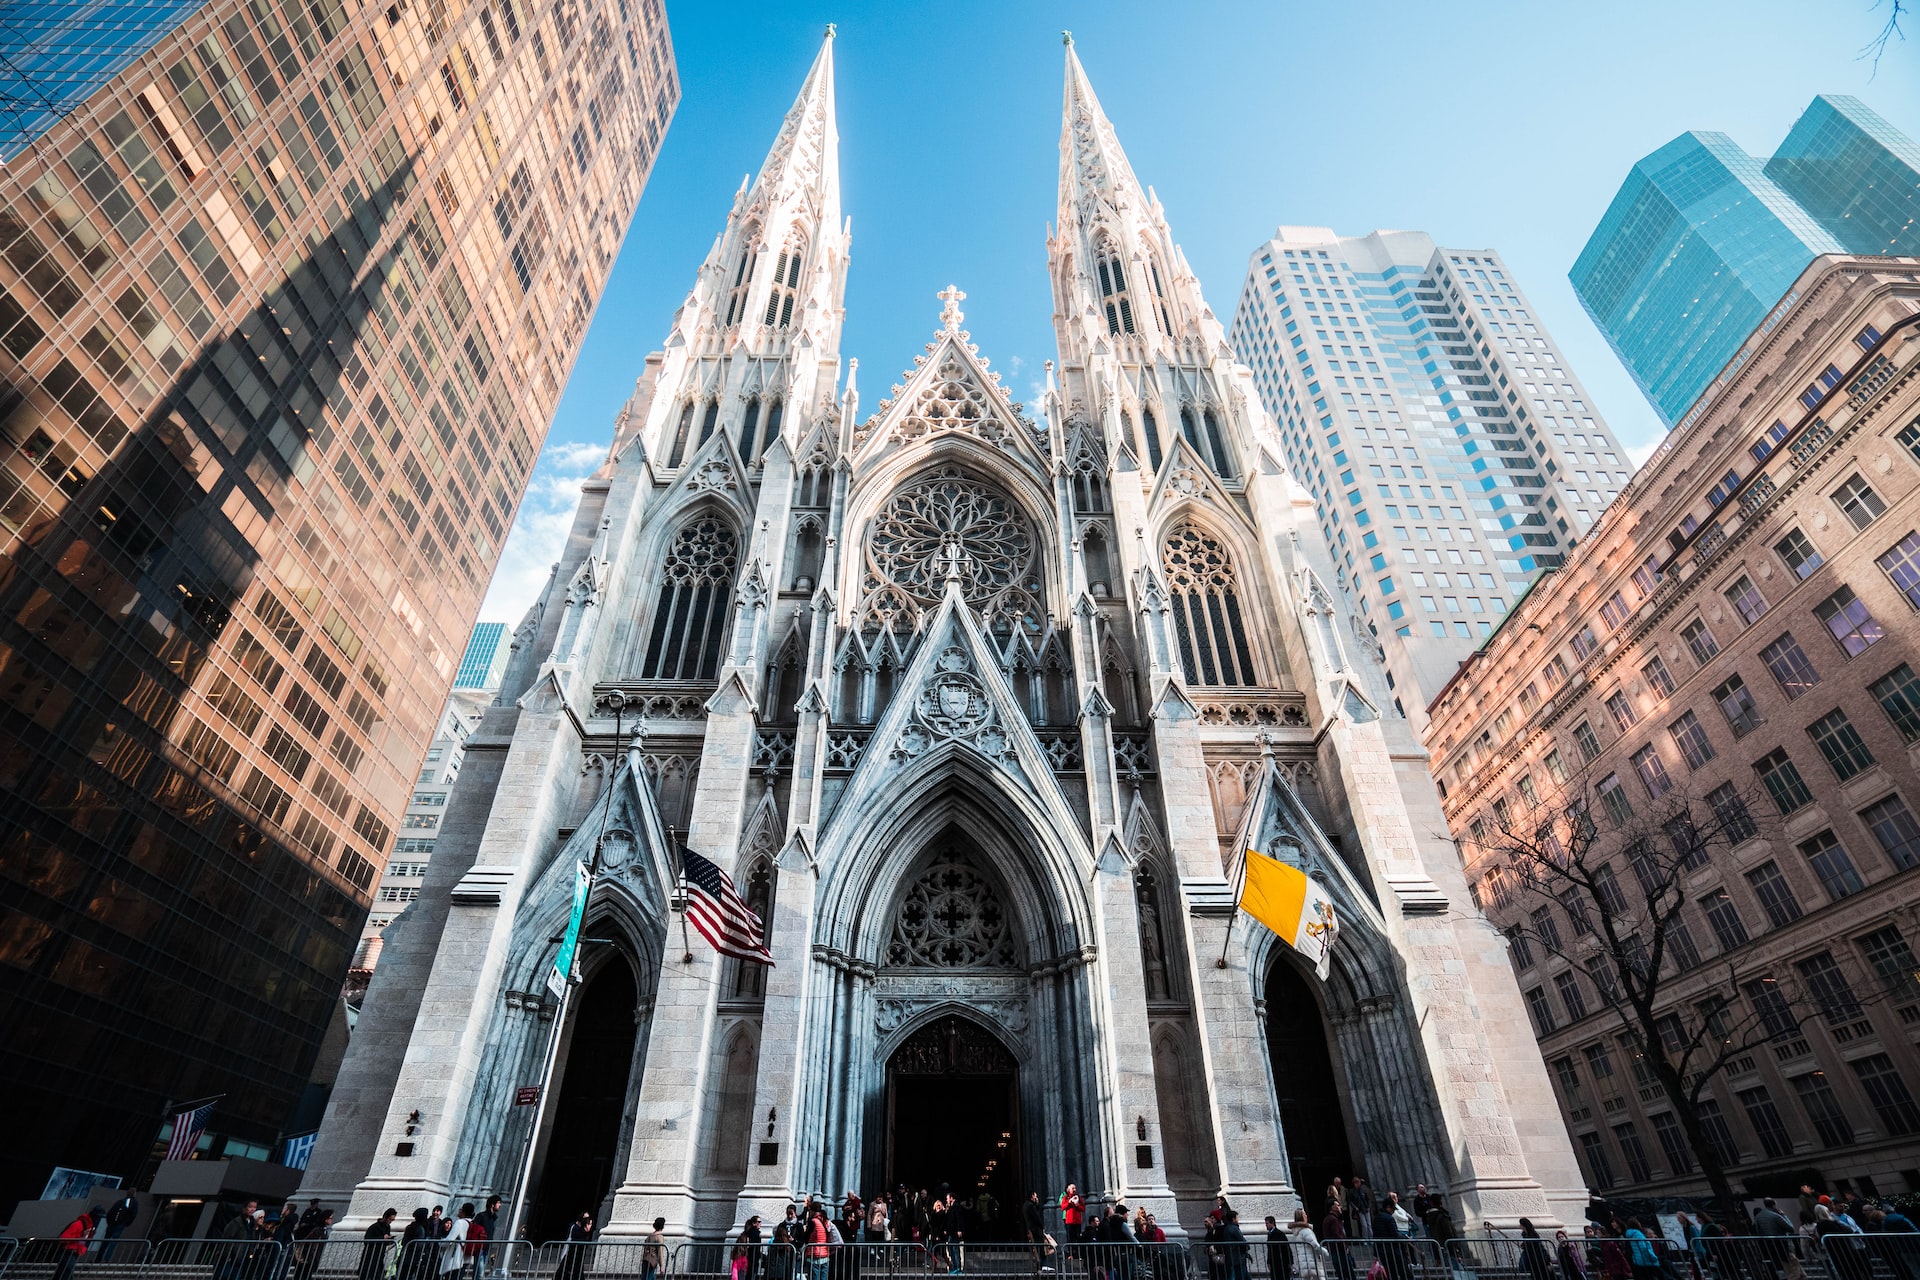 Saint Patrick's Cathedral in New York City.